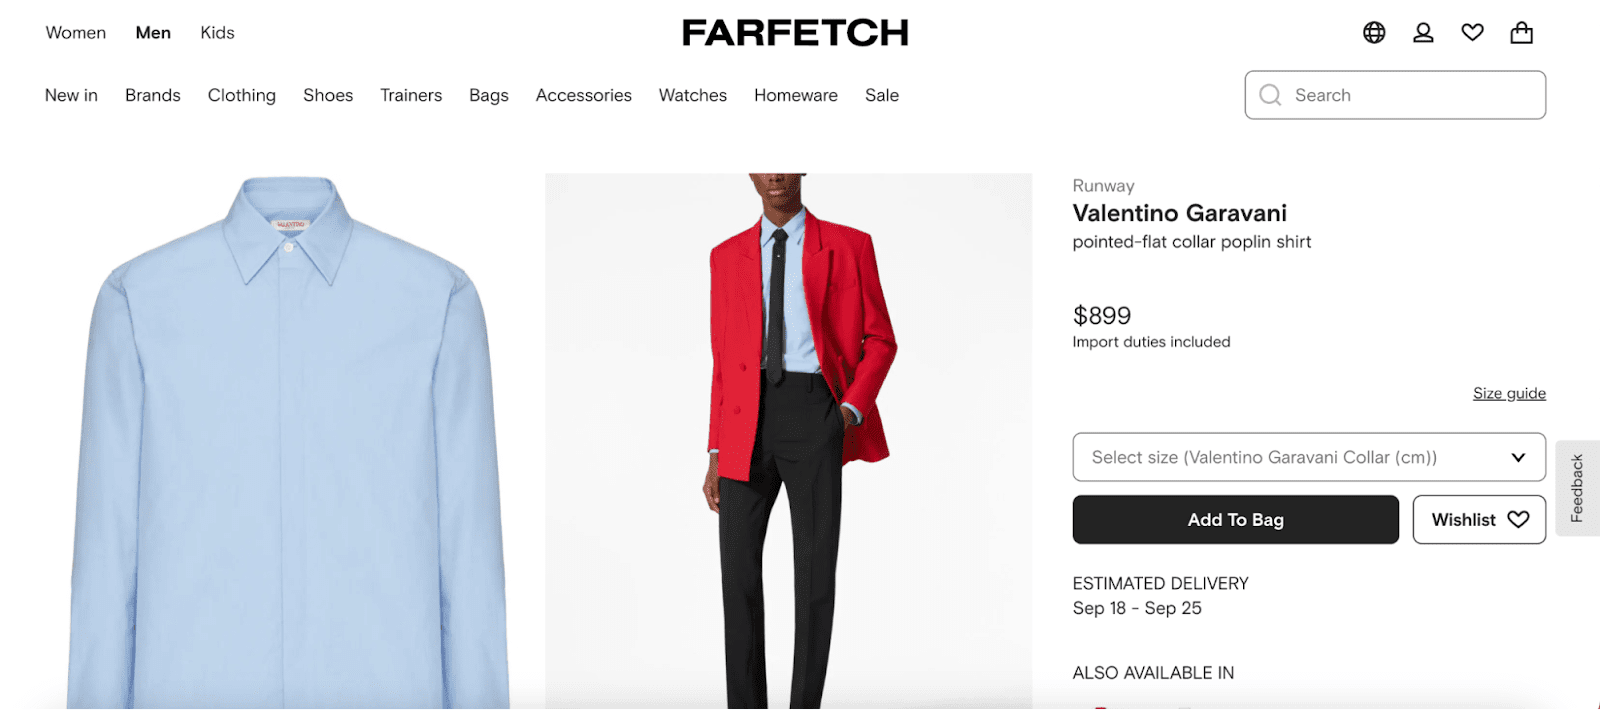 Farfetch's product listing in collaboration with Tim Dessaint